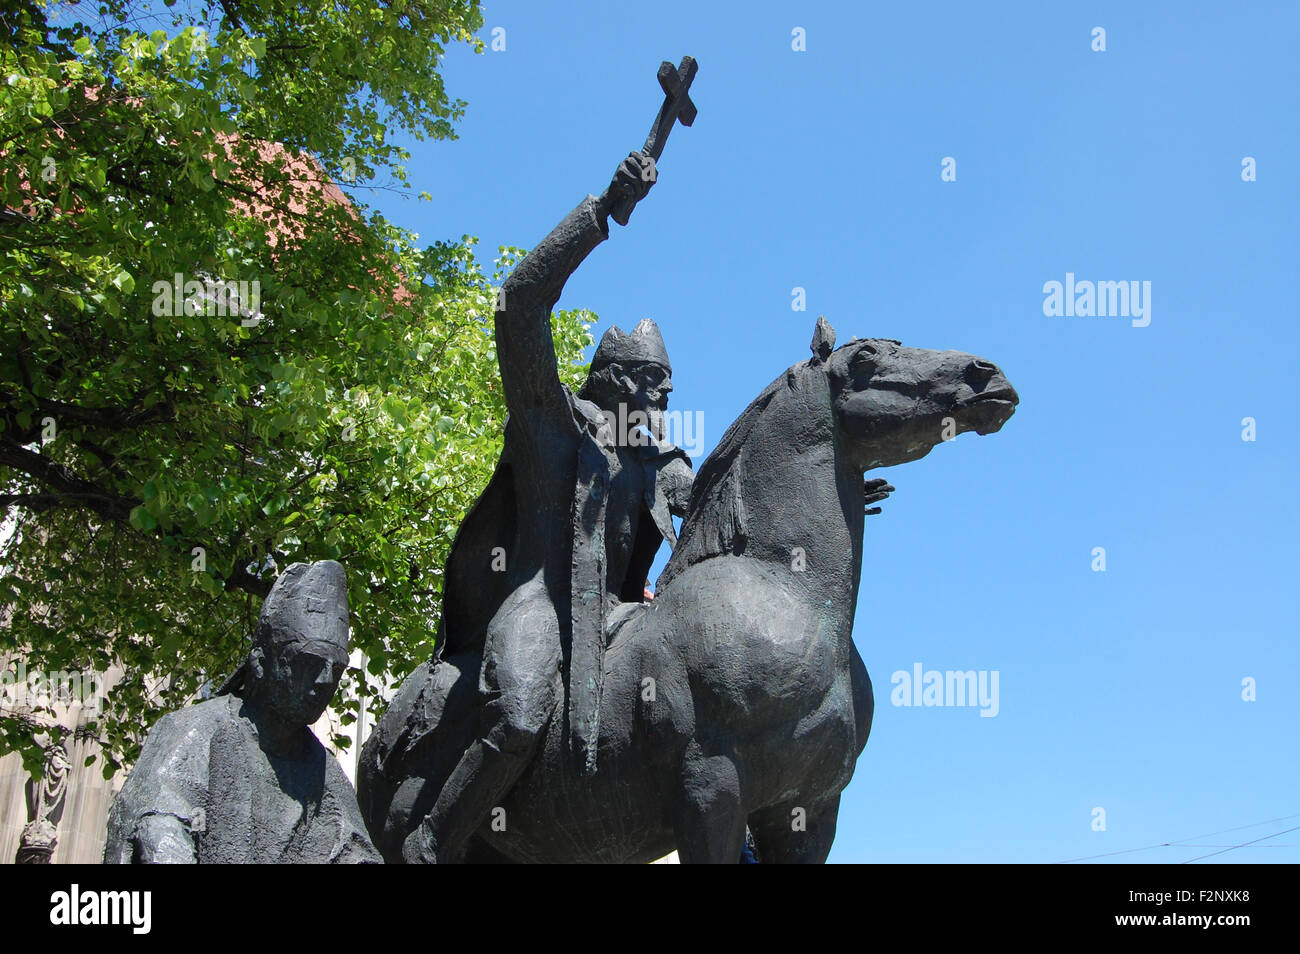 Statue of Bischof Ulrich zu Pferd (Bishop Ulrich on horseback) in front of the Cathedral in the city of Augsburg, Germany. Stock Photo